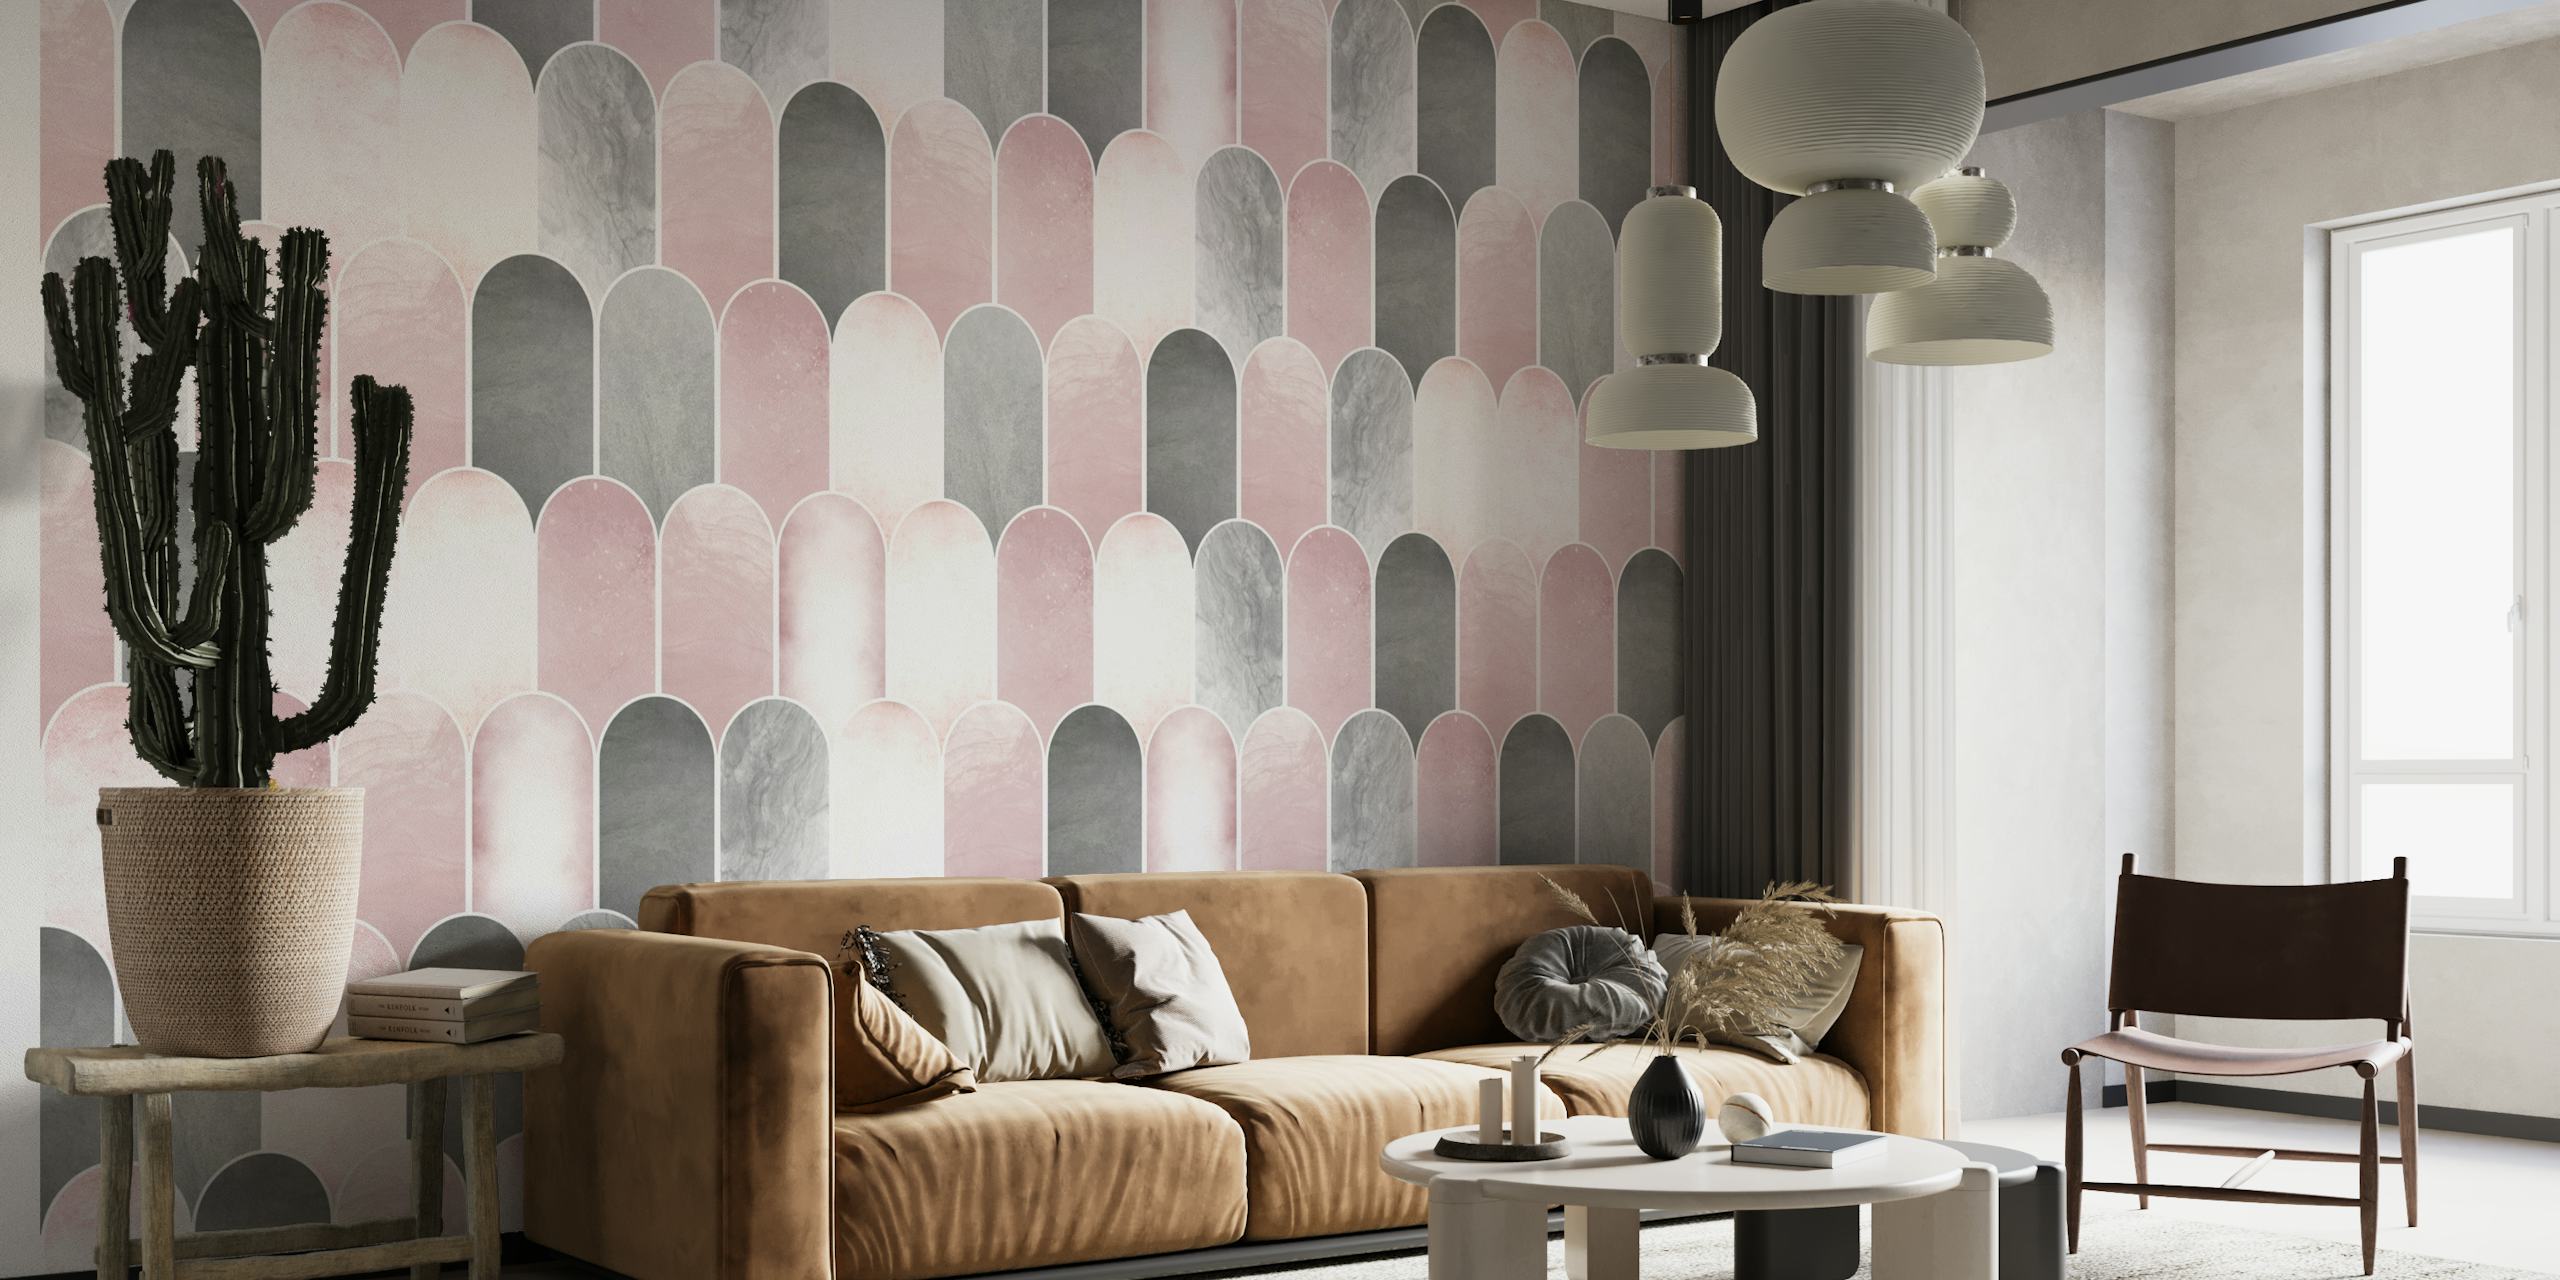 Tiled Wall in Pink and Grey ταπετσαρία